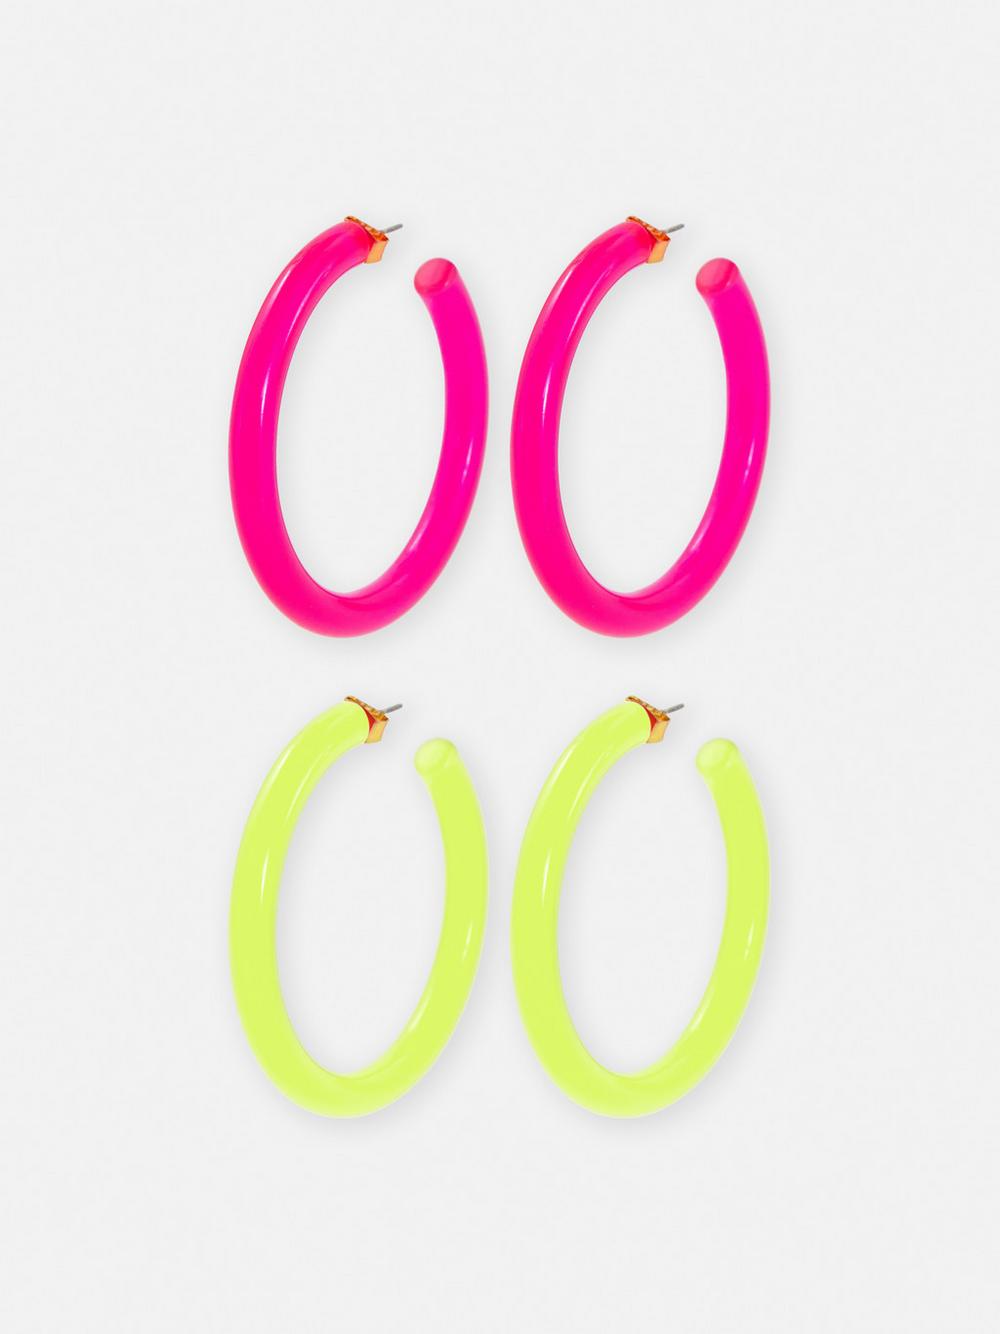 Candy Color Geometric Circle Round Spray Paint Hoop Earrings for Women Girl  Rose Yellow Blue White